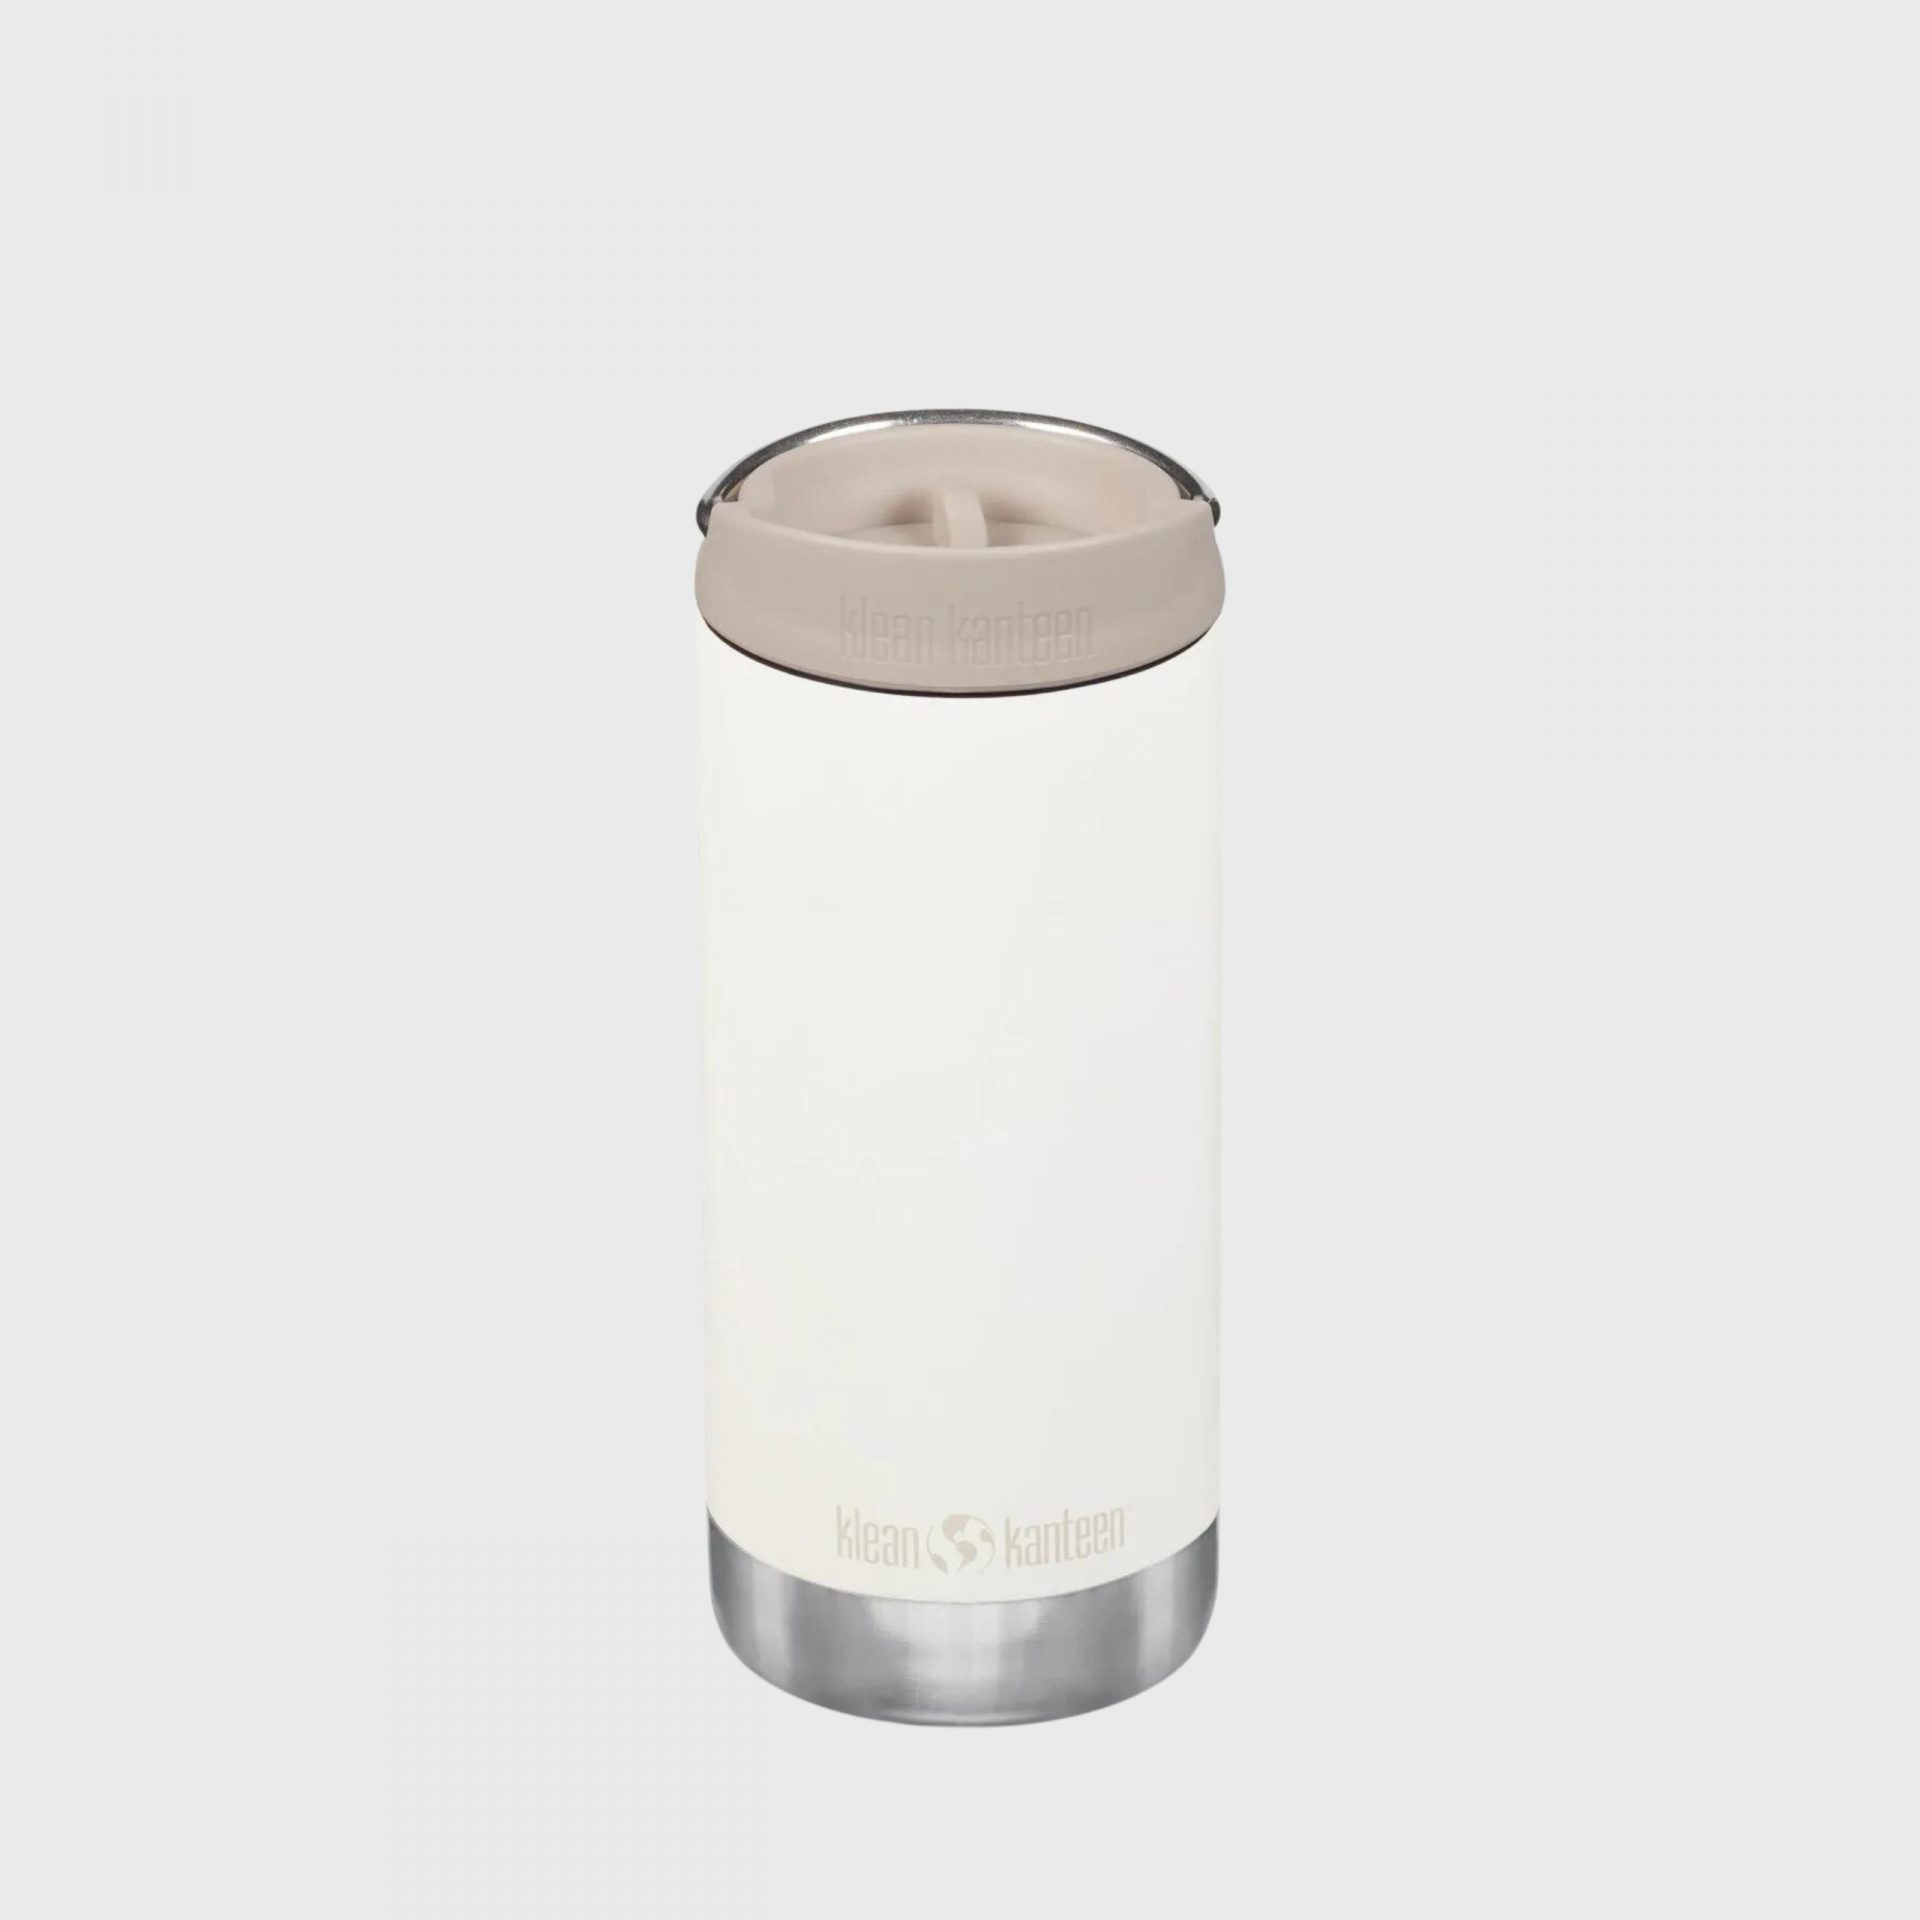 Klean Kanteen Singapore Sustainable Eco friendly Corporate Gifts 12 oz TKWide Insulated Coffee Tumbler with Café Cap Tofu